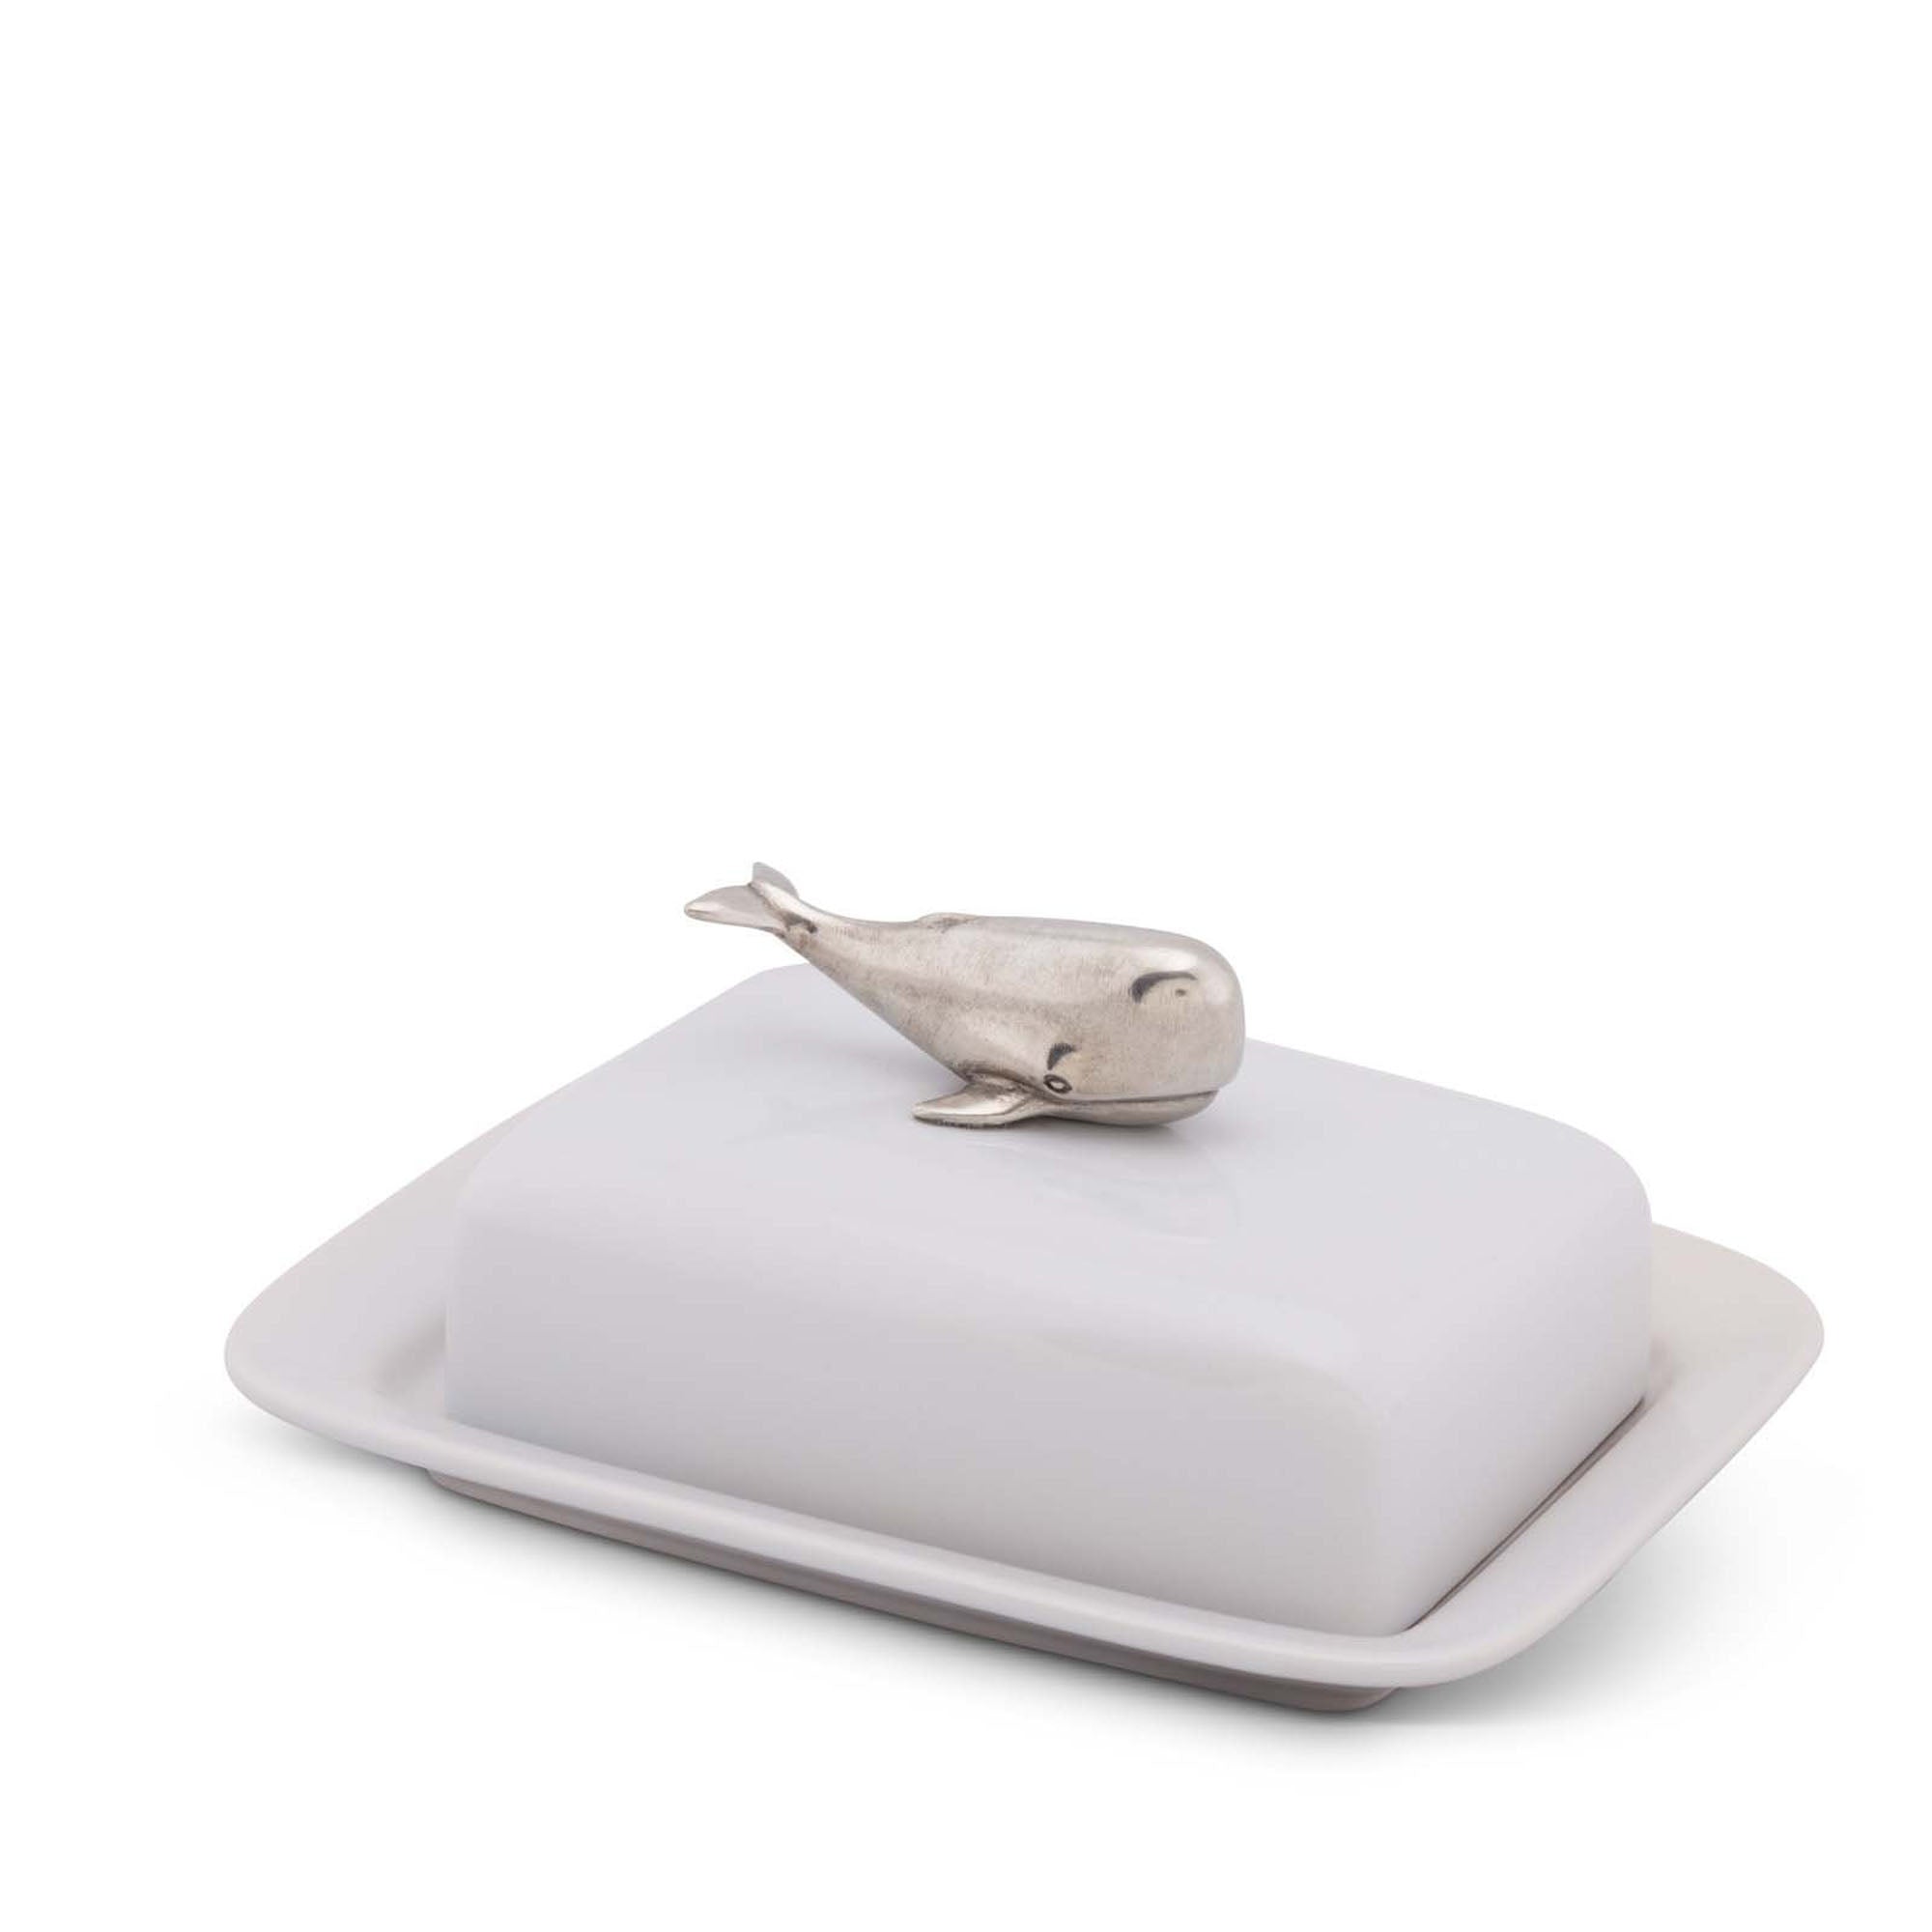 Vagabond House Whale Stoneware Butter dish Product Image